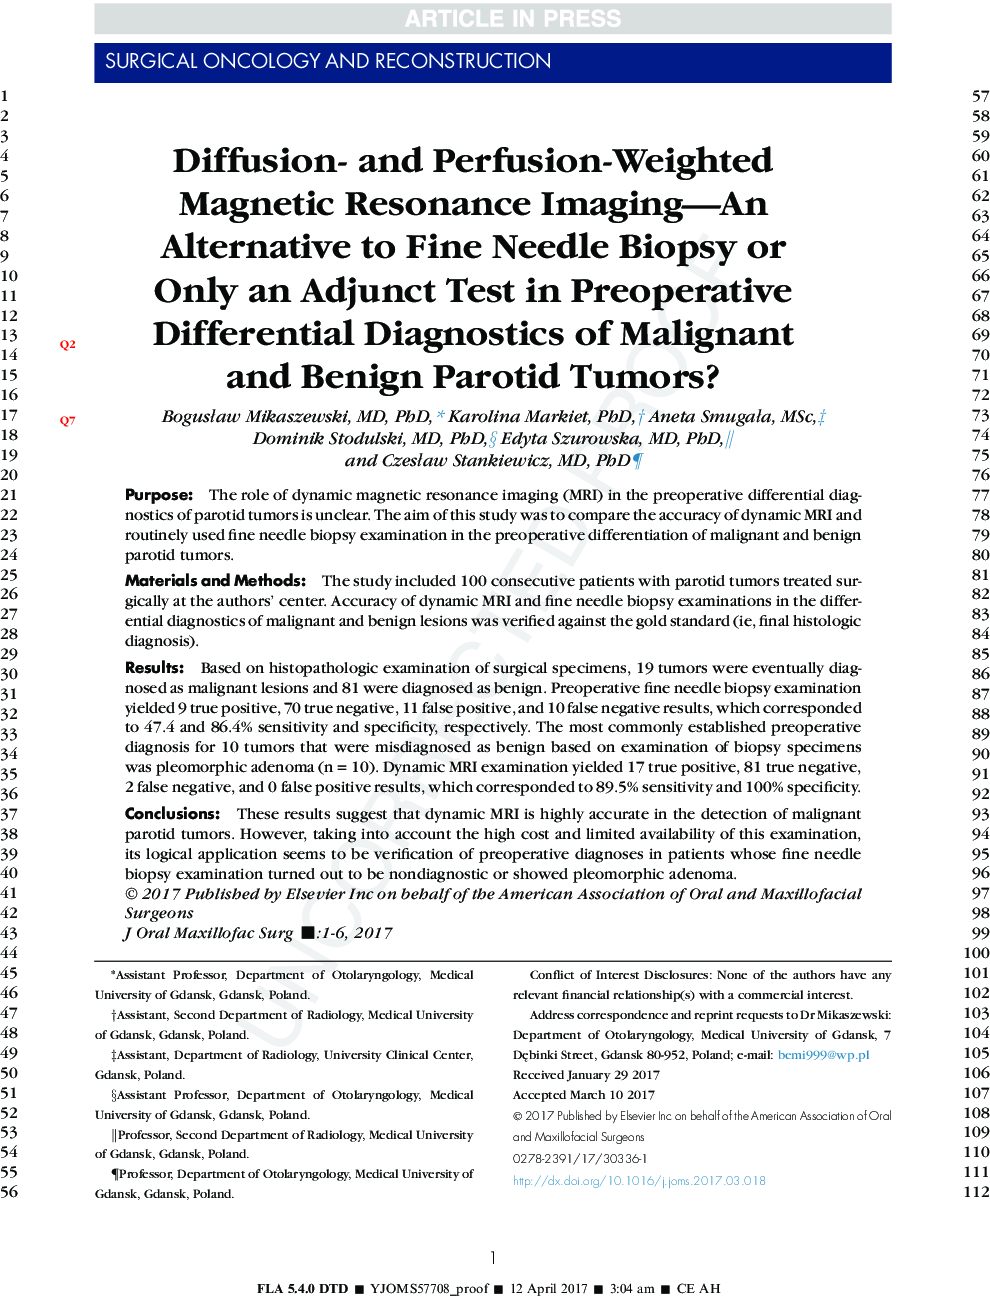 Diffusion- and Perfusion-Weighted Magnetic Resonance Imaging-An Alternative to Fine Needle Biopsy or Only an Adjunct Test in Preoperative Differential Diagnostics of Malignant and Benign Parotid Tumors?